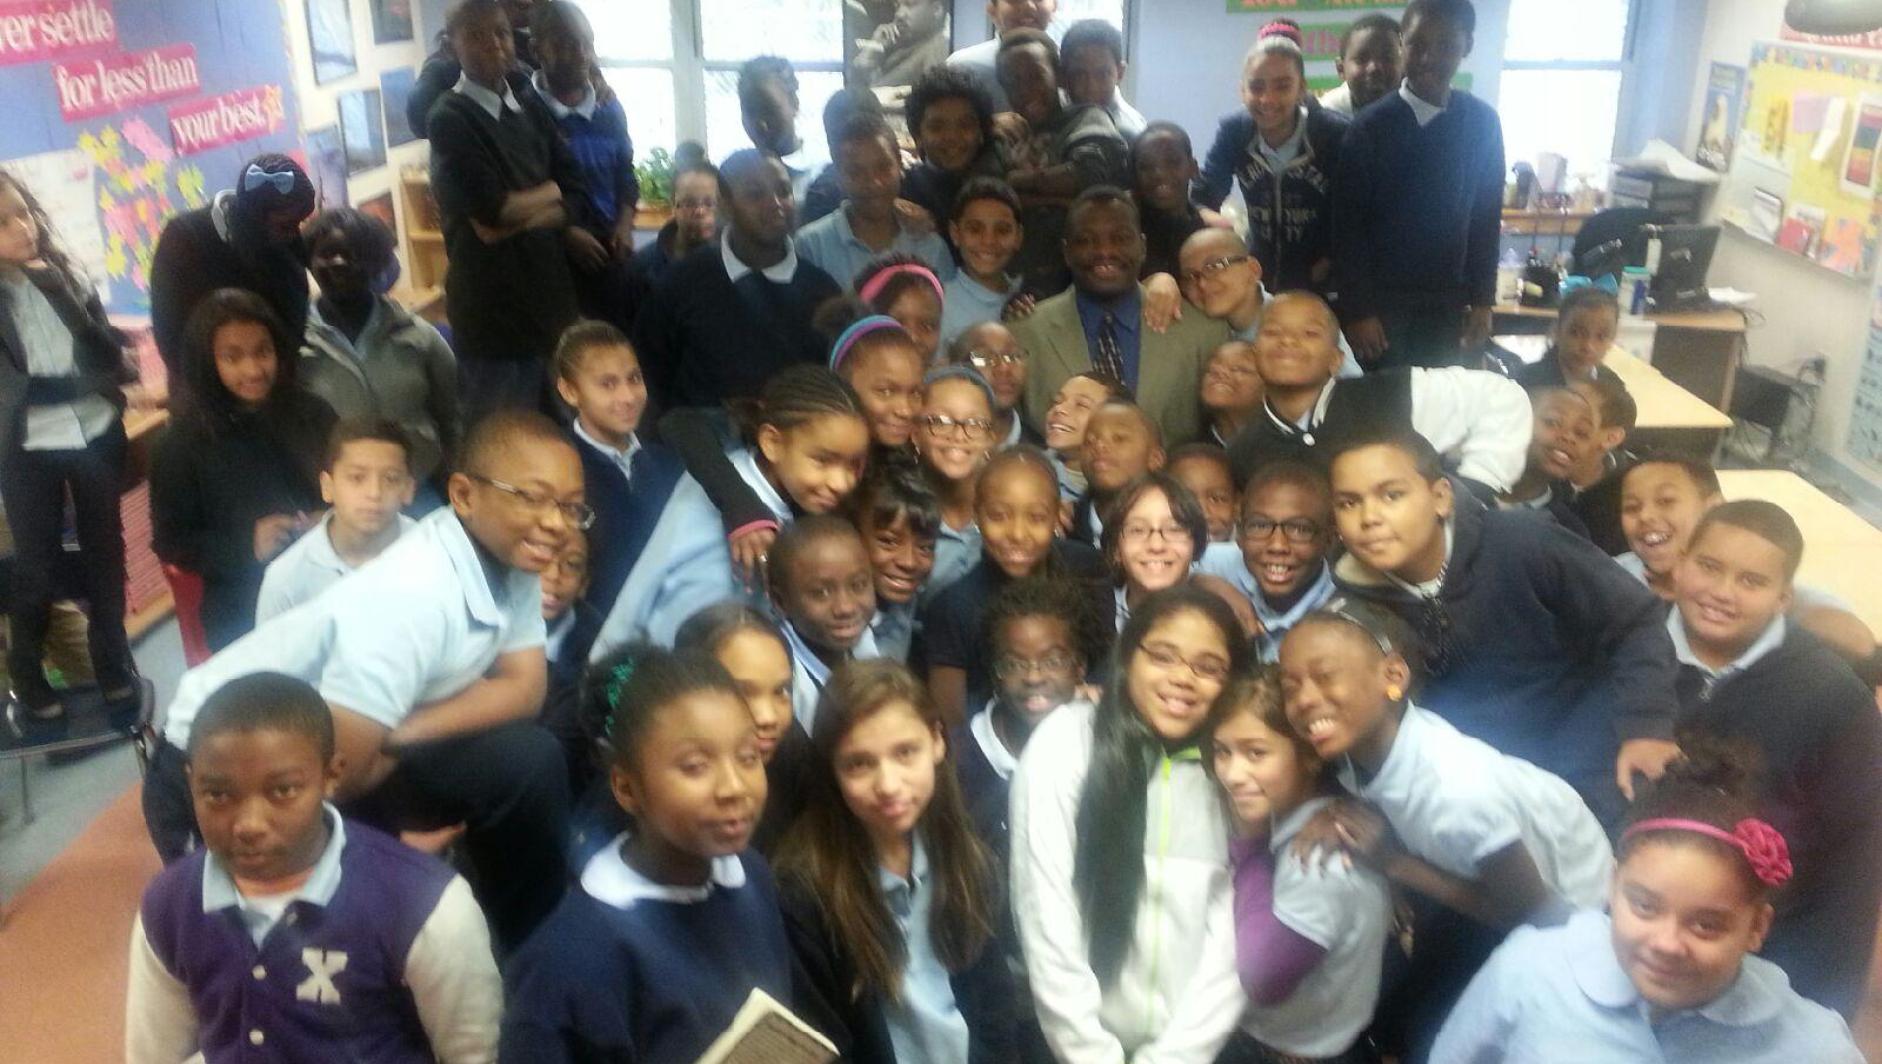 Dr. Hill visits MLK Charter school and poses with children. 